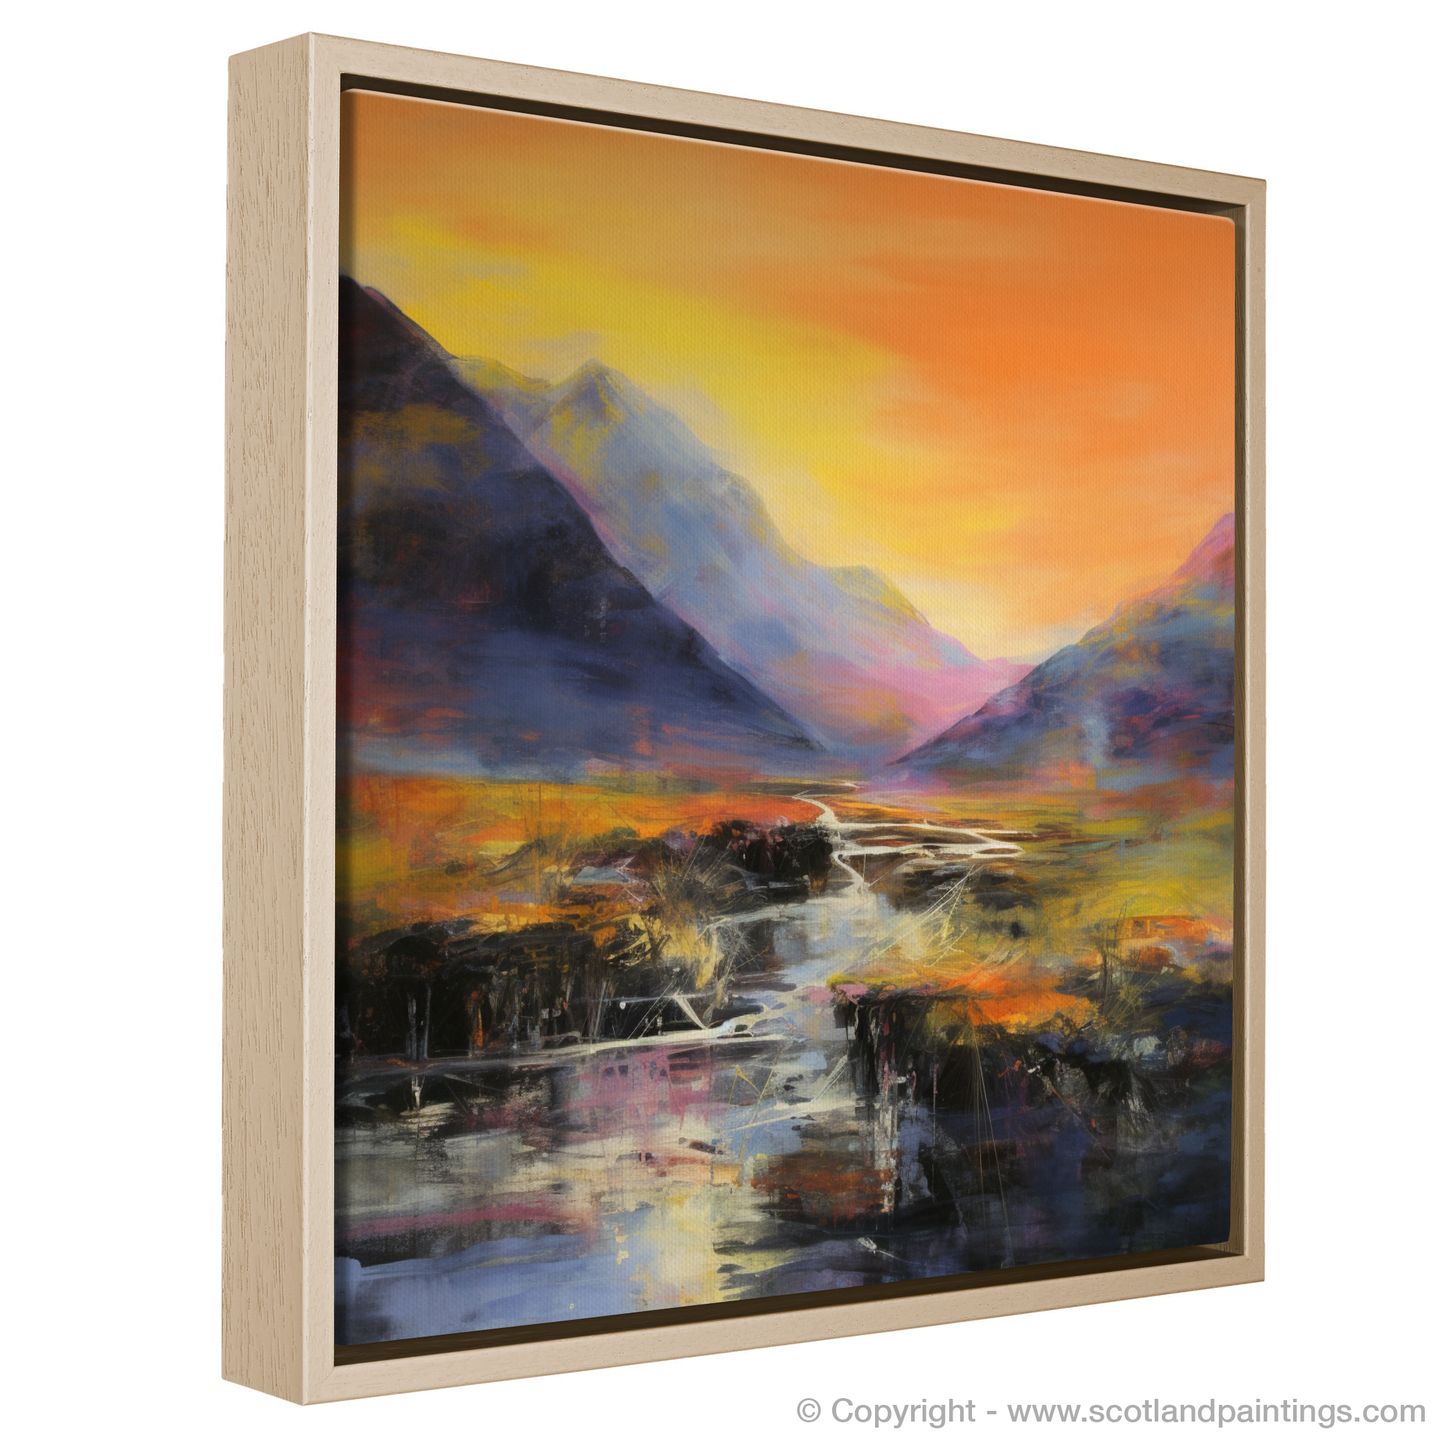 Painting and Art Print of Walker crossing River Coe in Glencoe entitled "Abstract Reverie: Walker's Crossing at River Coe".